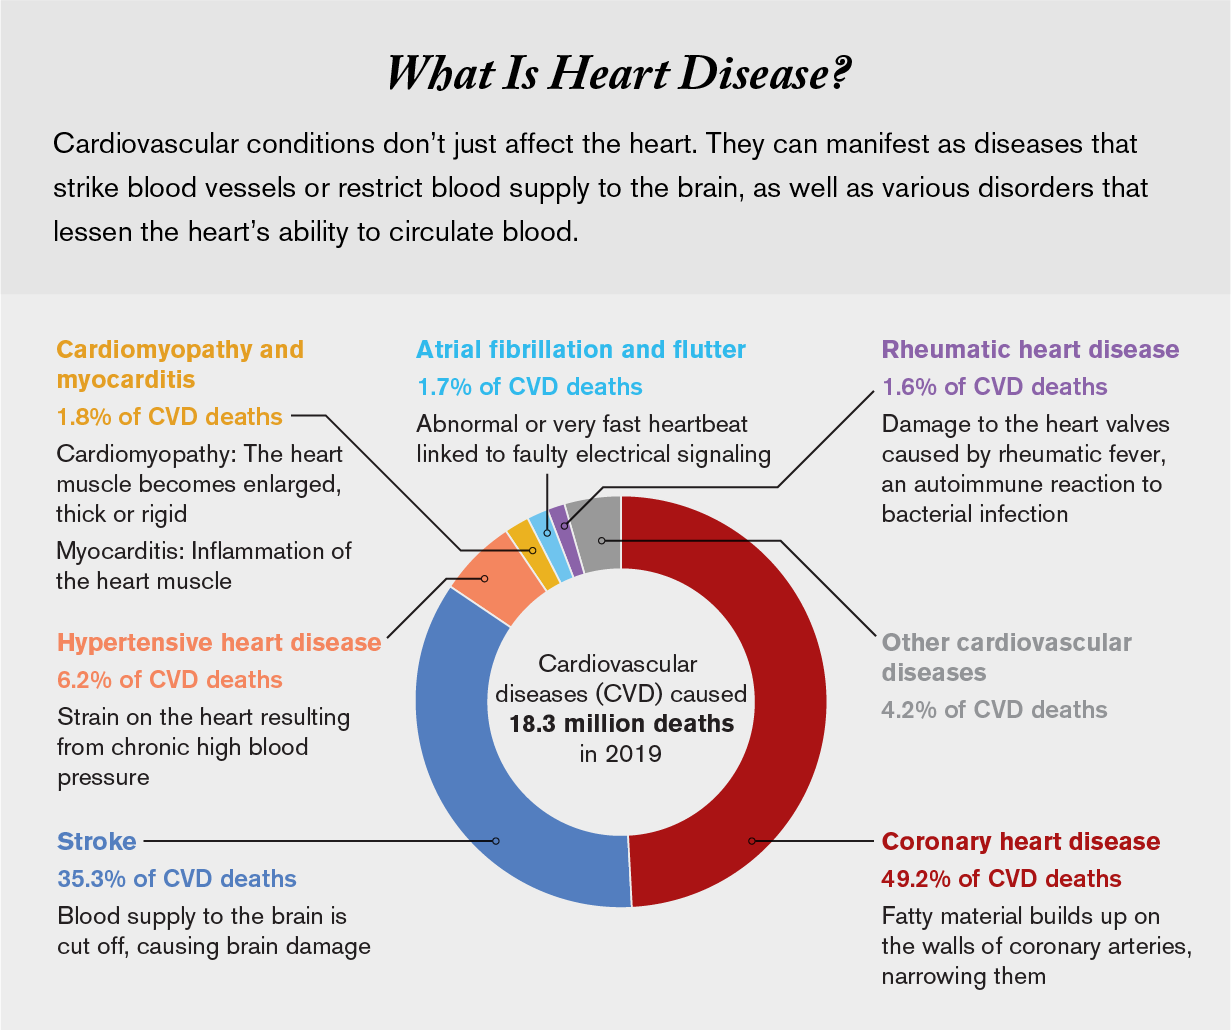 Chart lists six cardiovascular diseases that killed 18.3 million people in 2019 and shows percent of deaths caused by each.